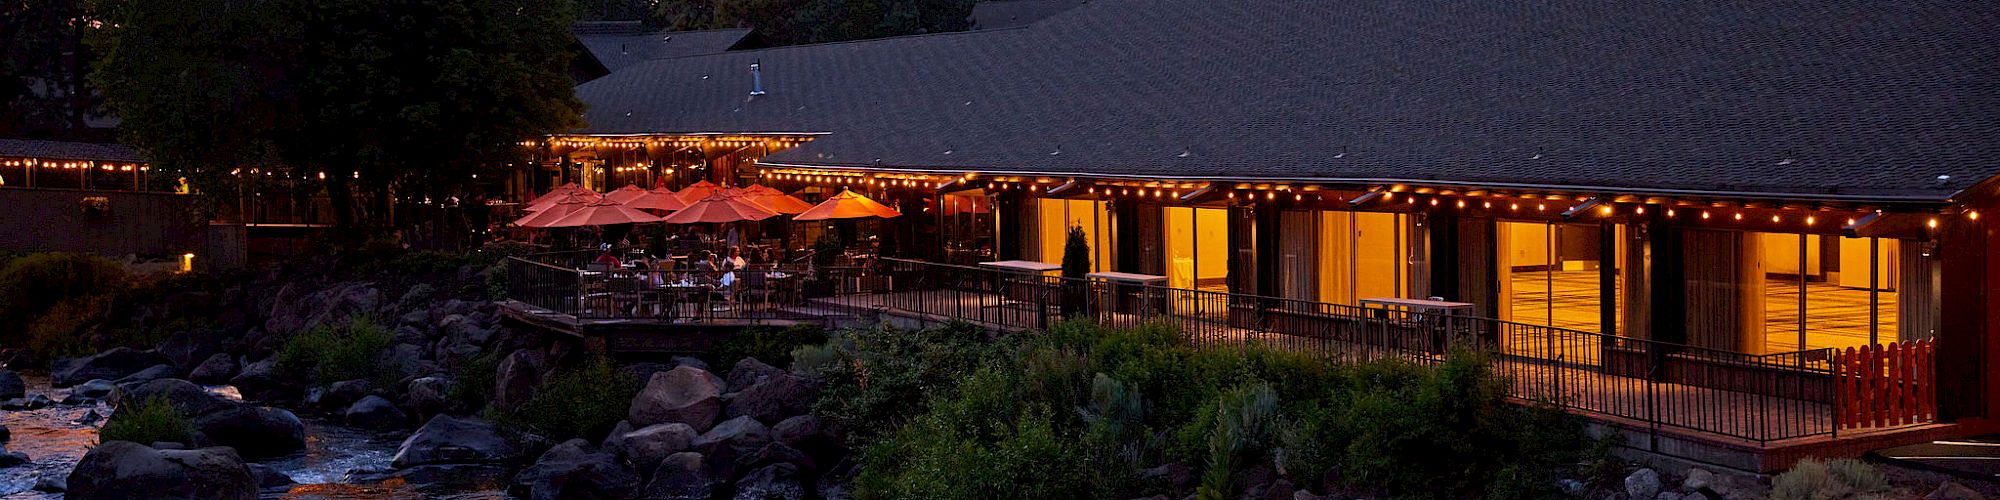 A peaceful riverside restaurant with outdoor seating, decorated with string lights, surrounded by rocks and trees at sunset.